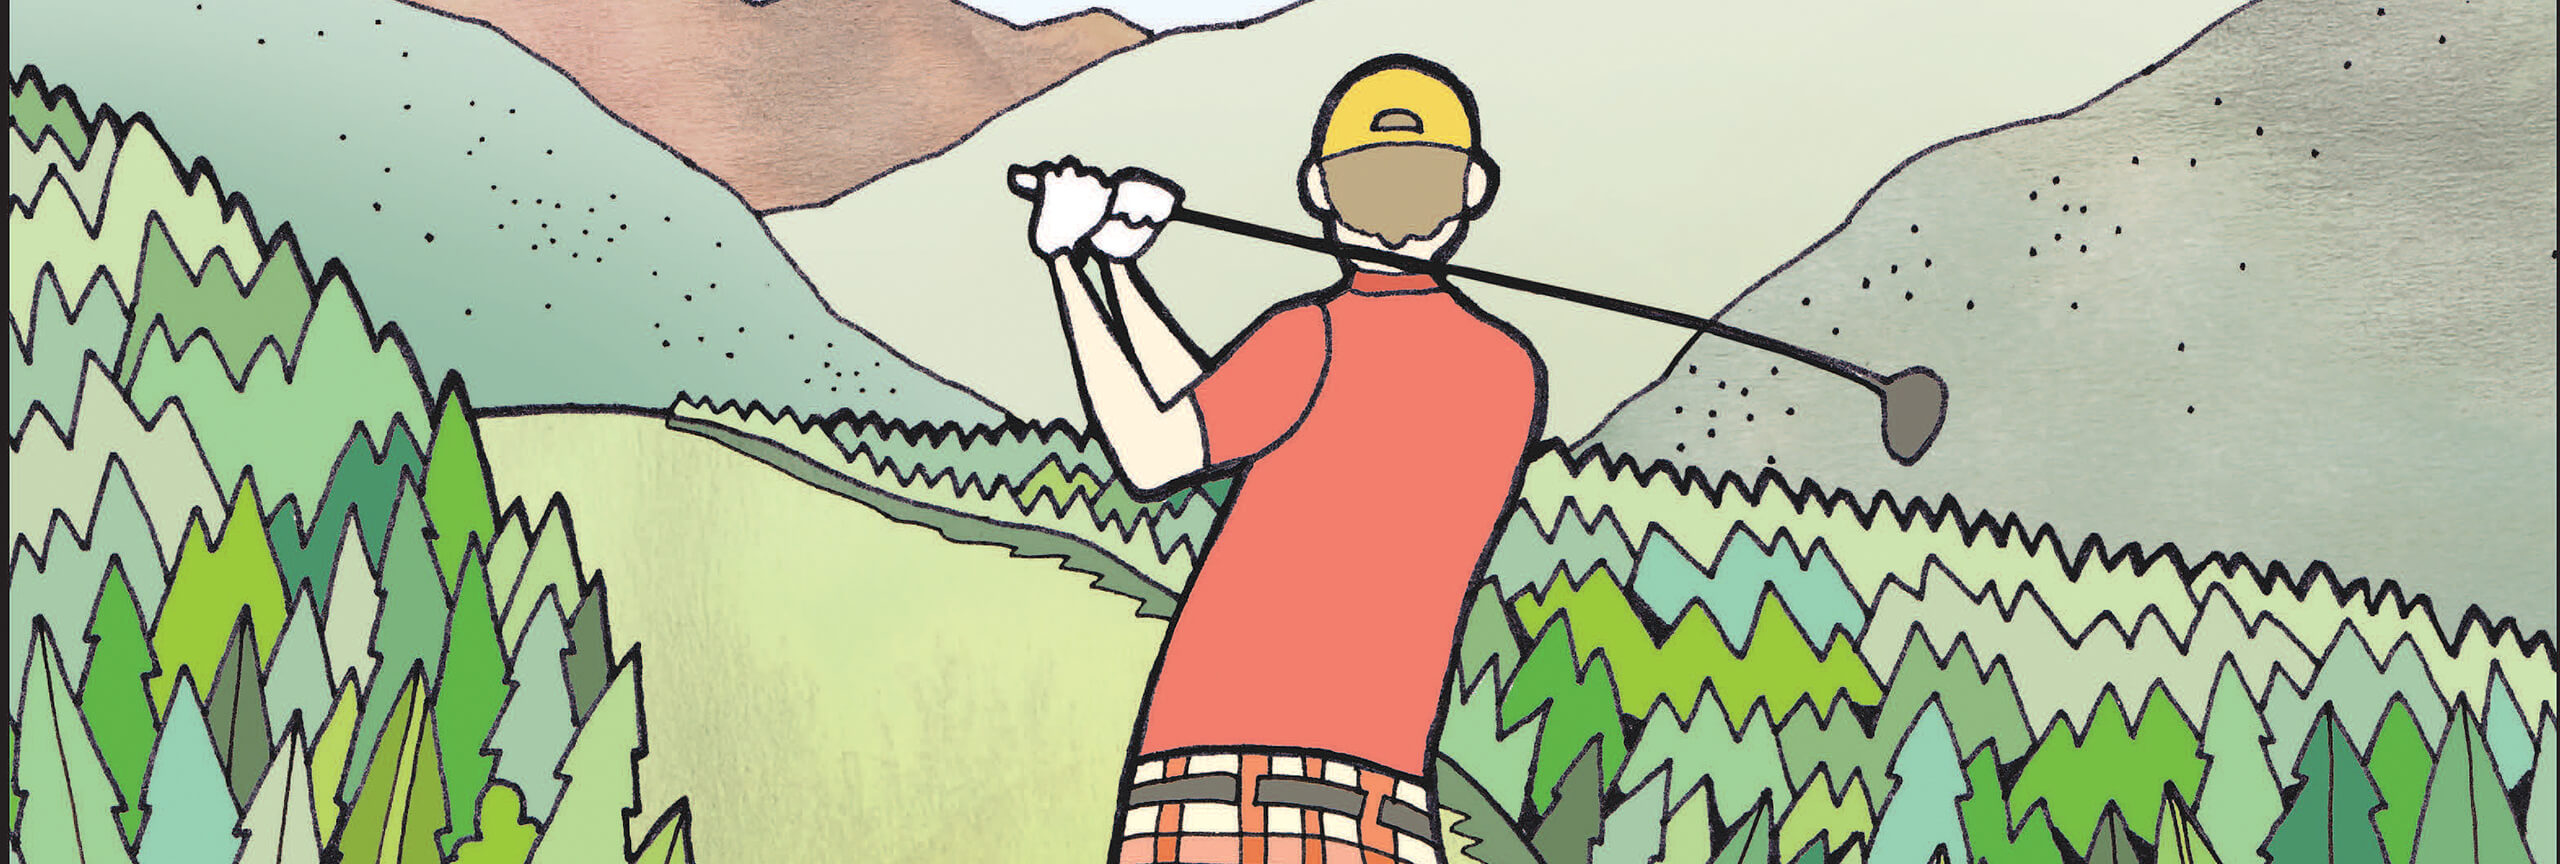 Illustration of a man golfing with pine trees and mountains in the background